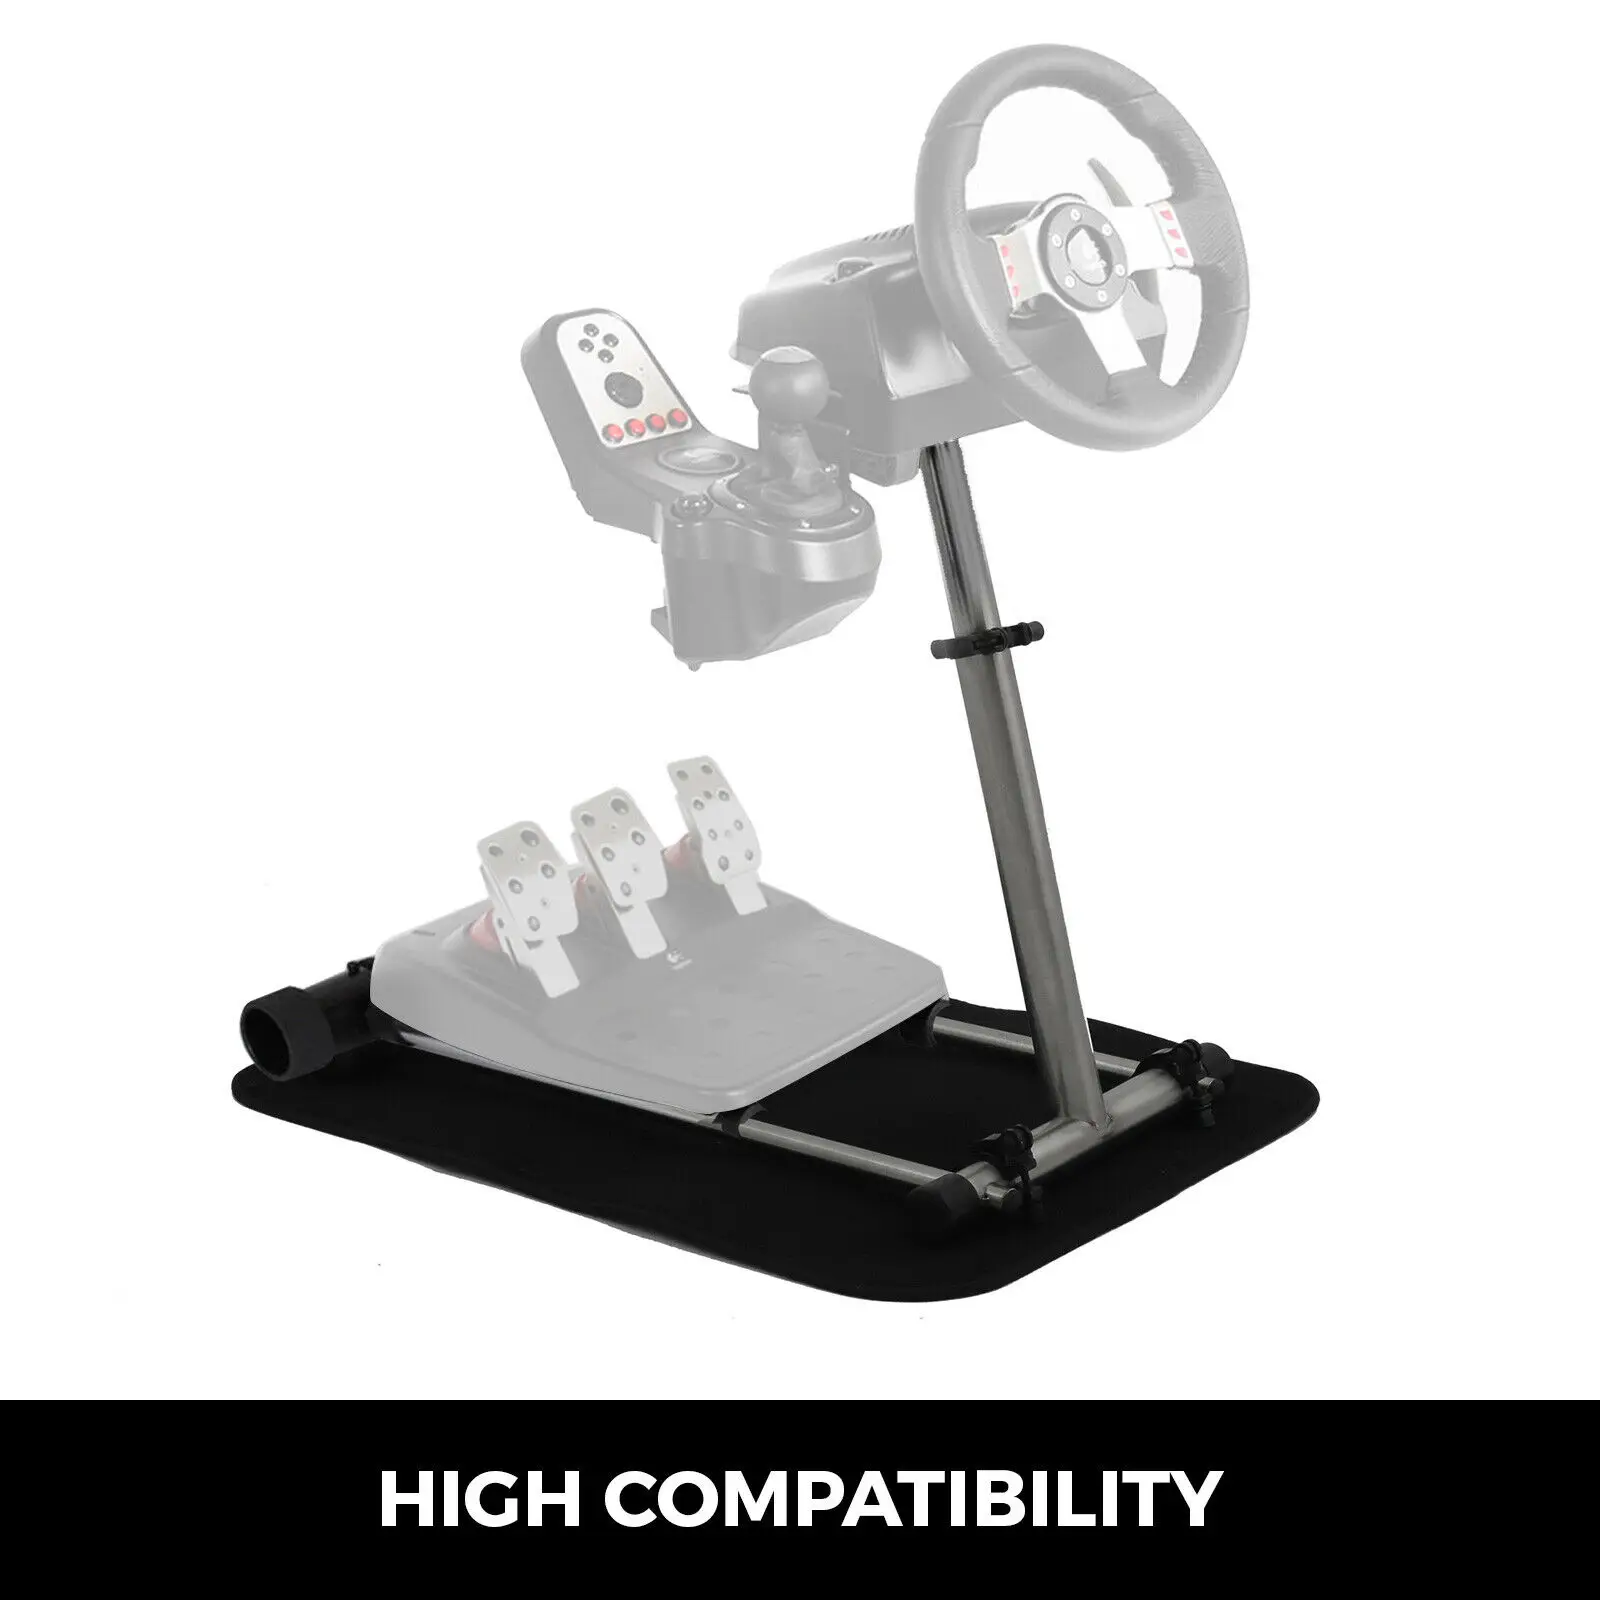 Racing Steering Wheel Stand 360 Degree Stepless Adjustable Fit for G25 G27 G29 G920 Thrustmaste